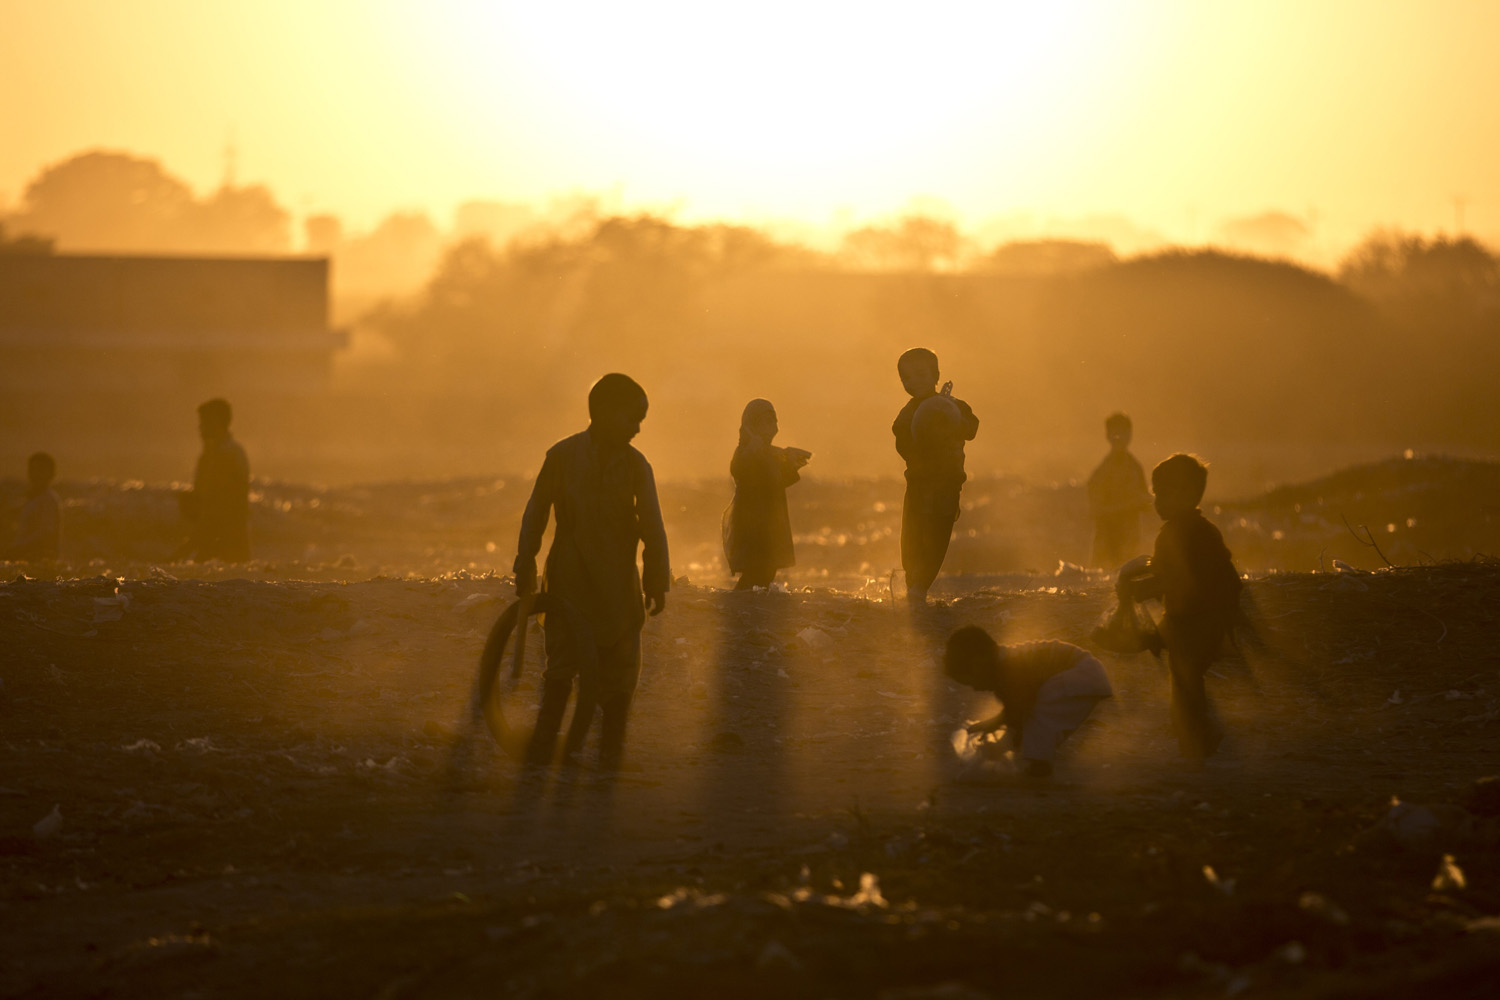 Nov. 25, 2013. Afghan refugee children play in a field as the sun sets on the outskirts of Islamabad, Pakistan.